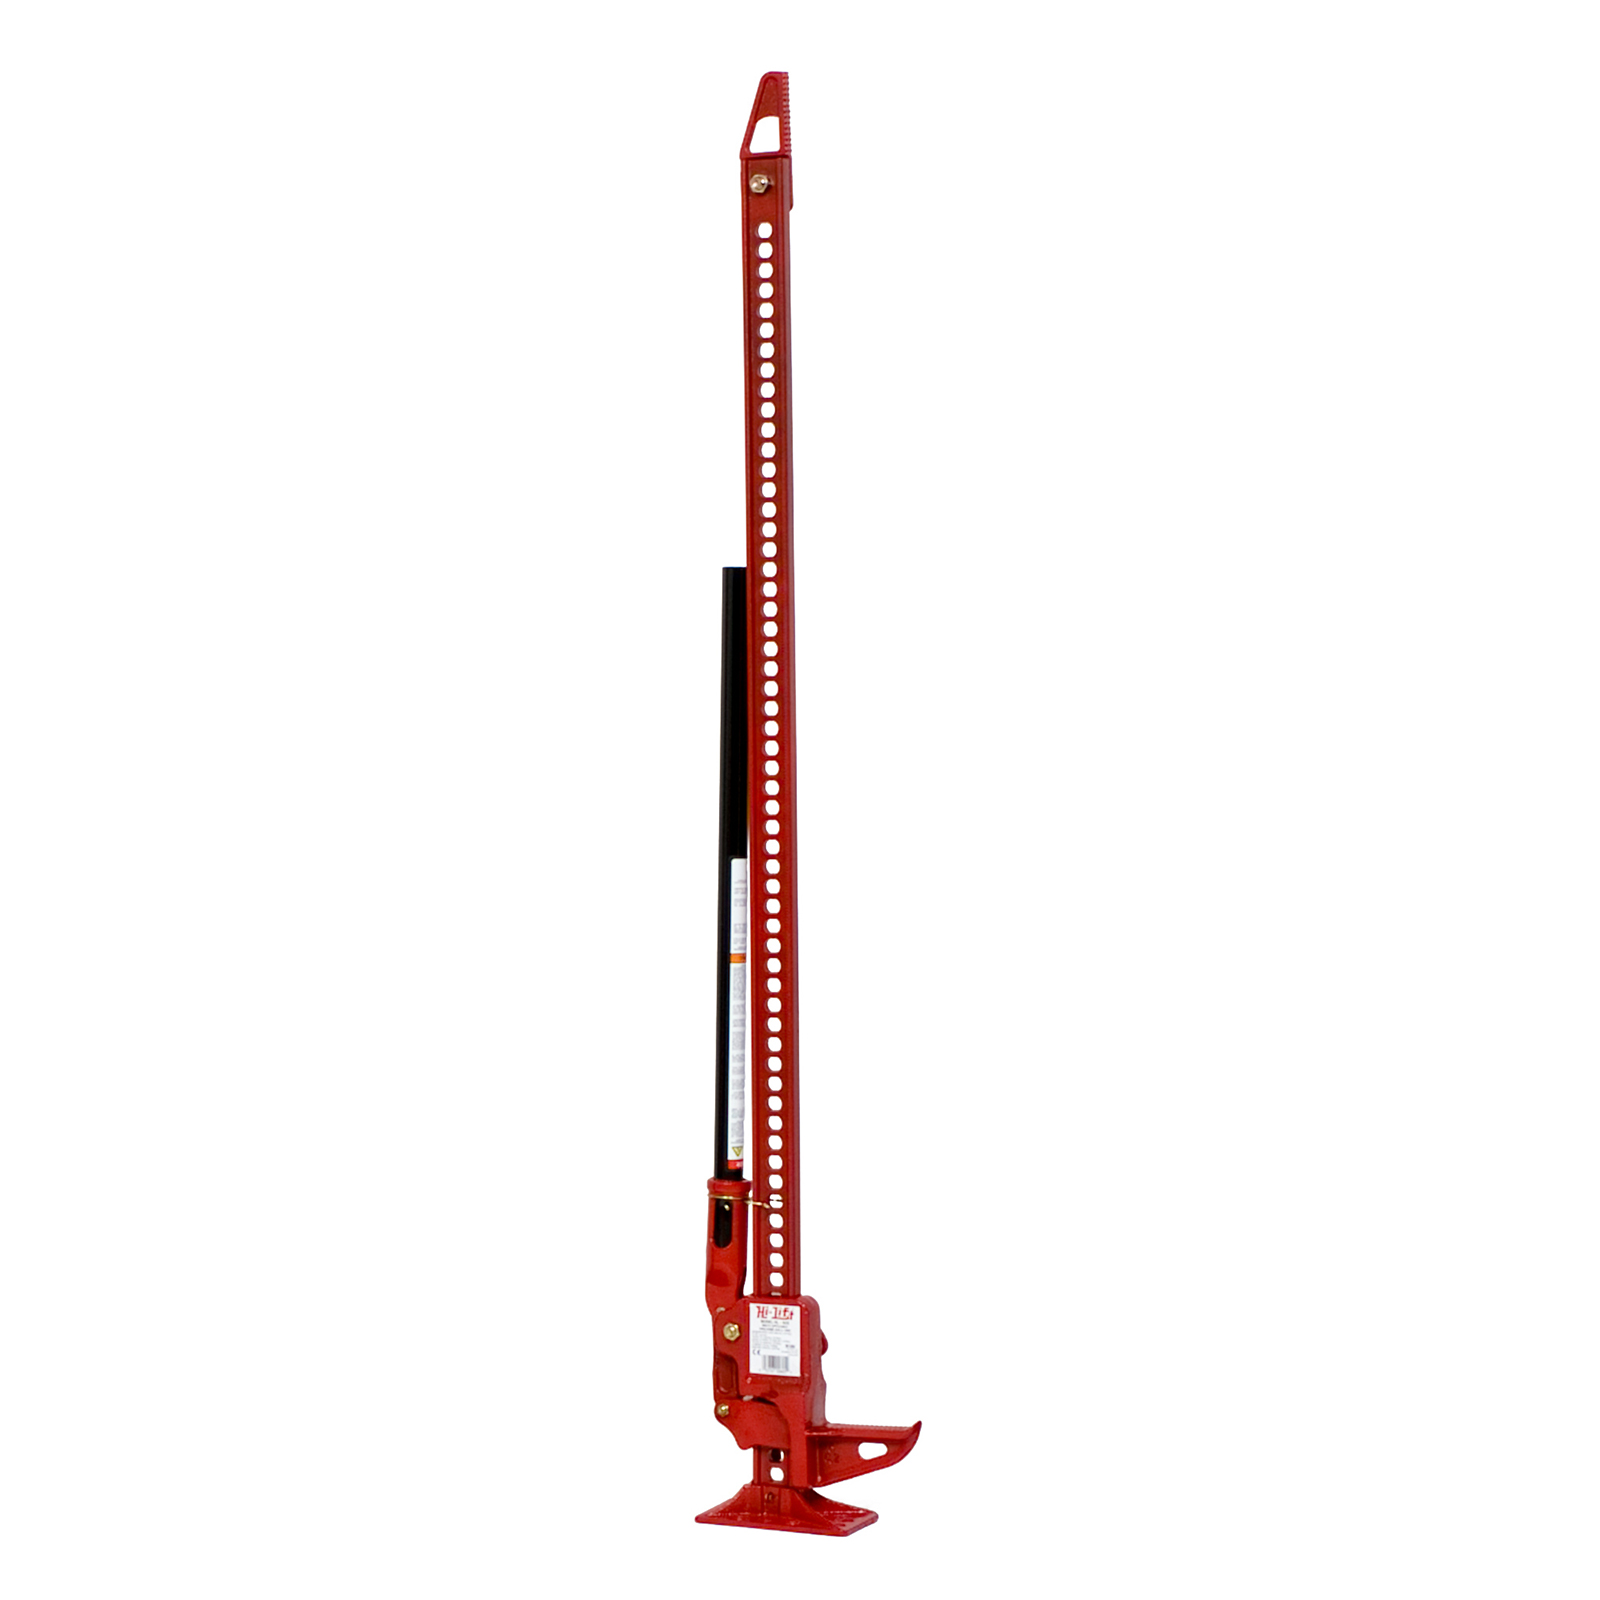 Hi-Lift Jack HL-605 Cast Iron & Steel 60" Height Red 4,660 lbs Capacity - image 1 of 3